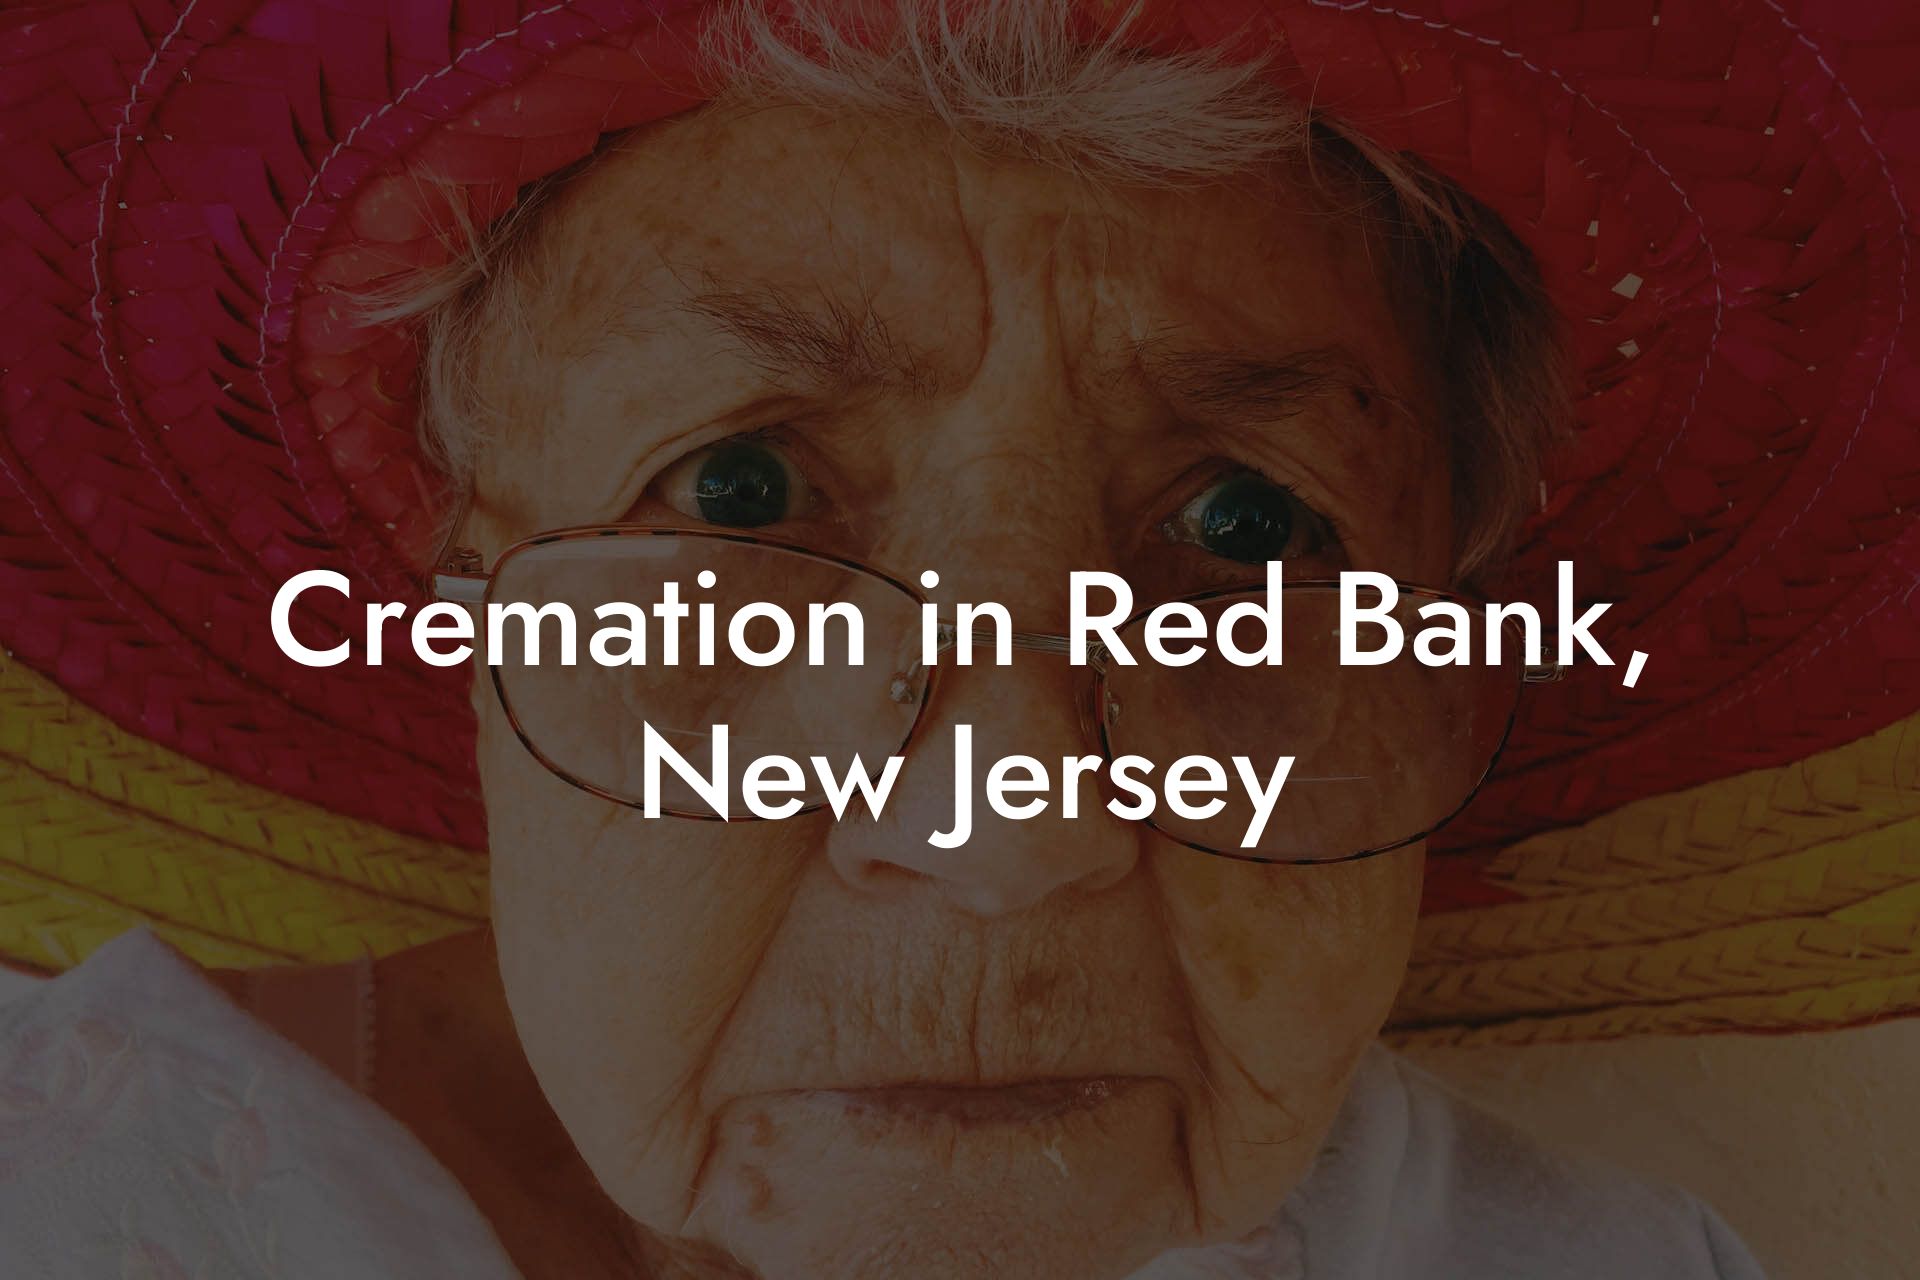 Cremation in Red Bank, New Jersey